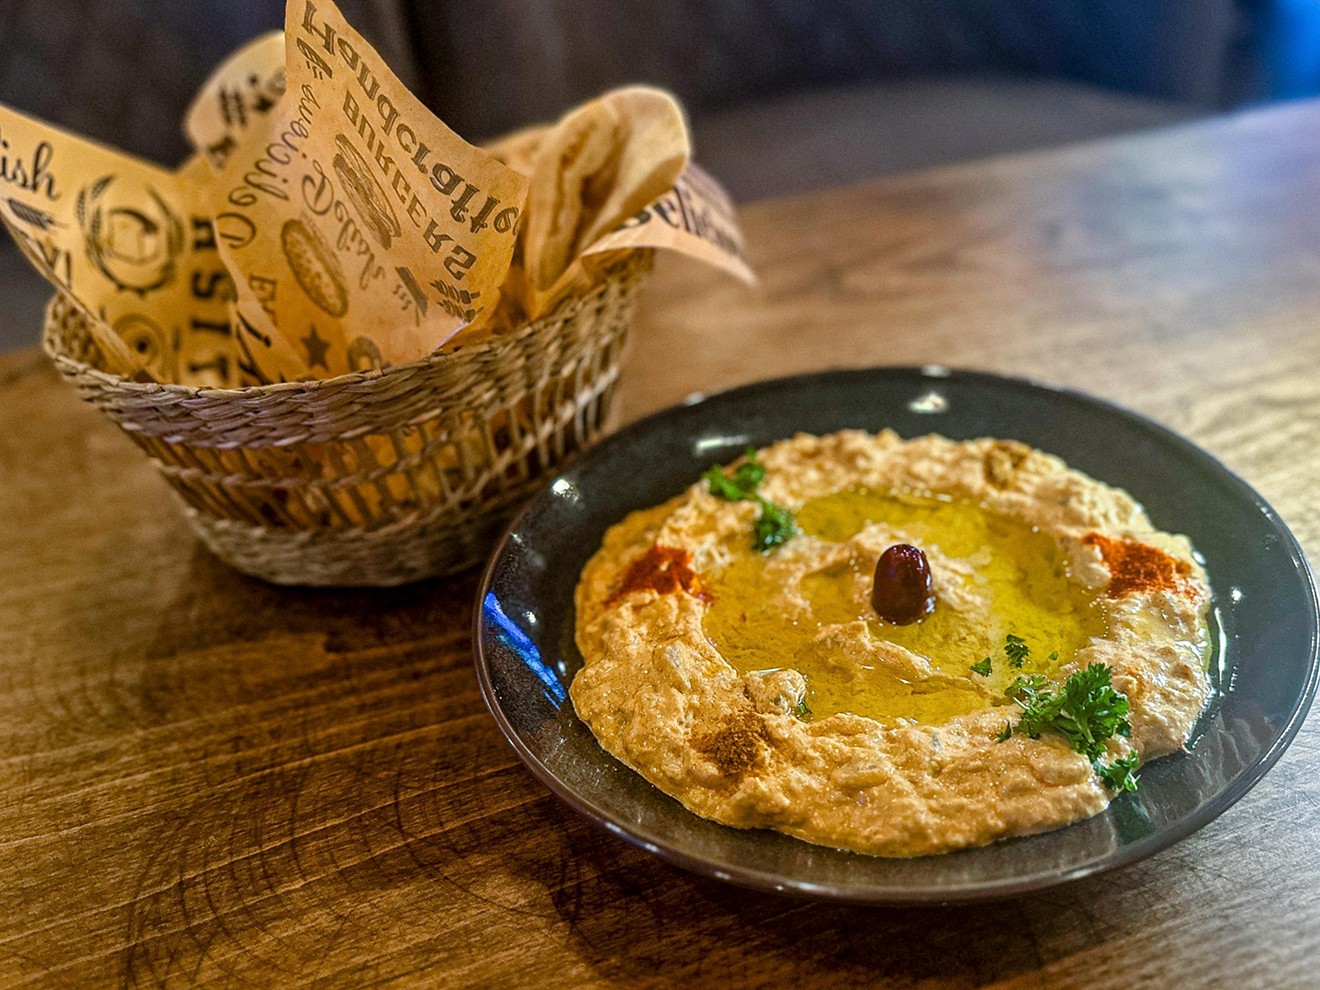 Spicy baba ghanoush at Cavalli's.